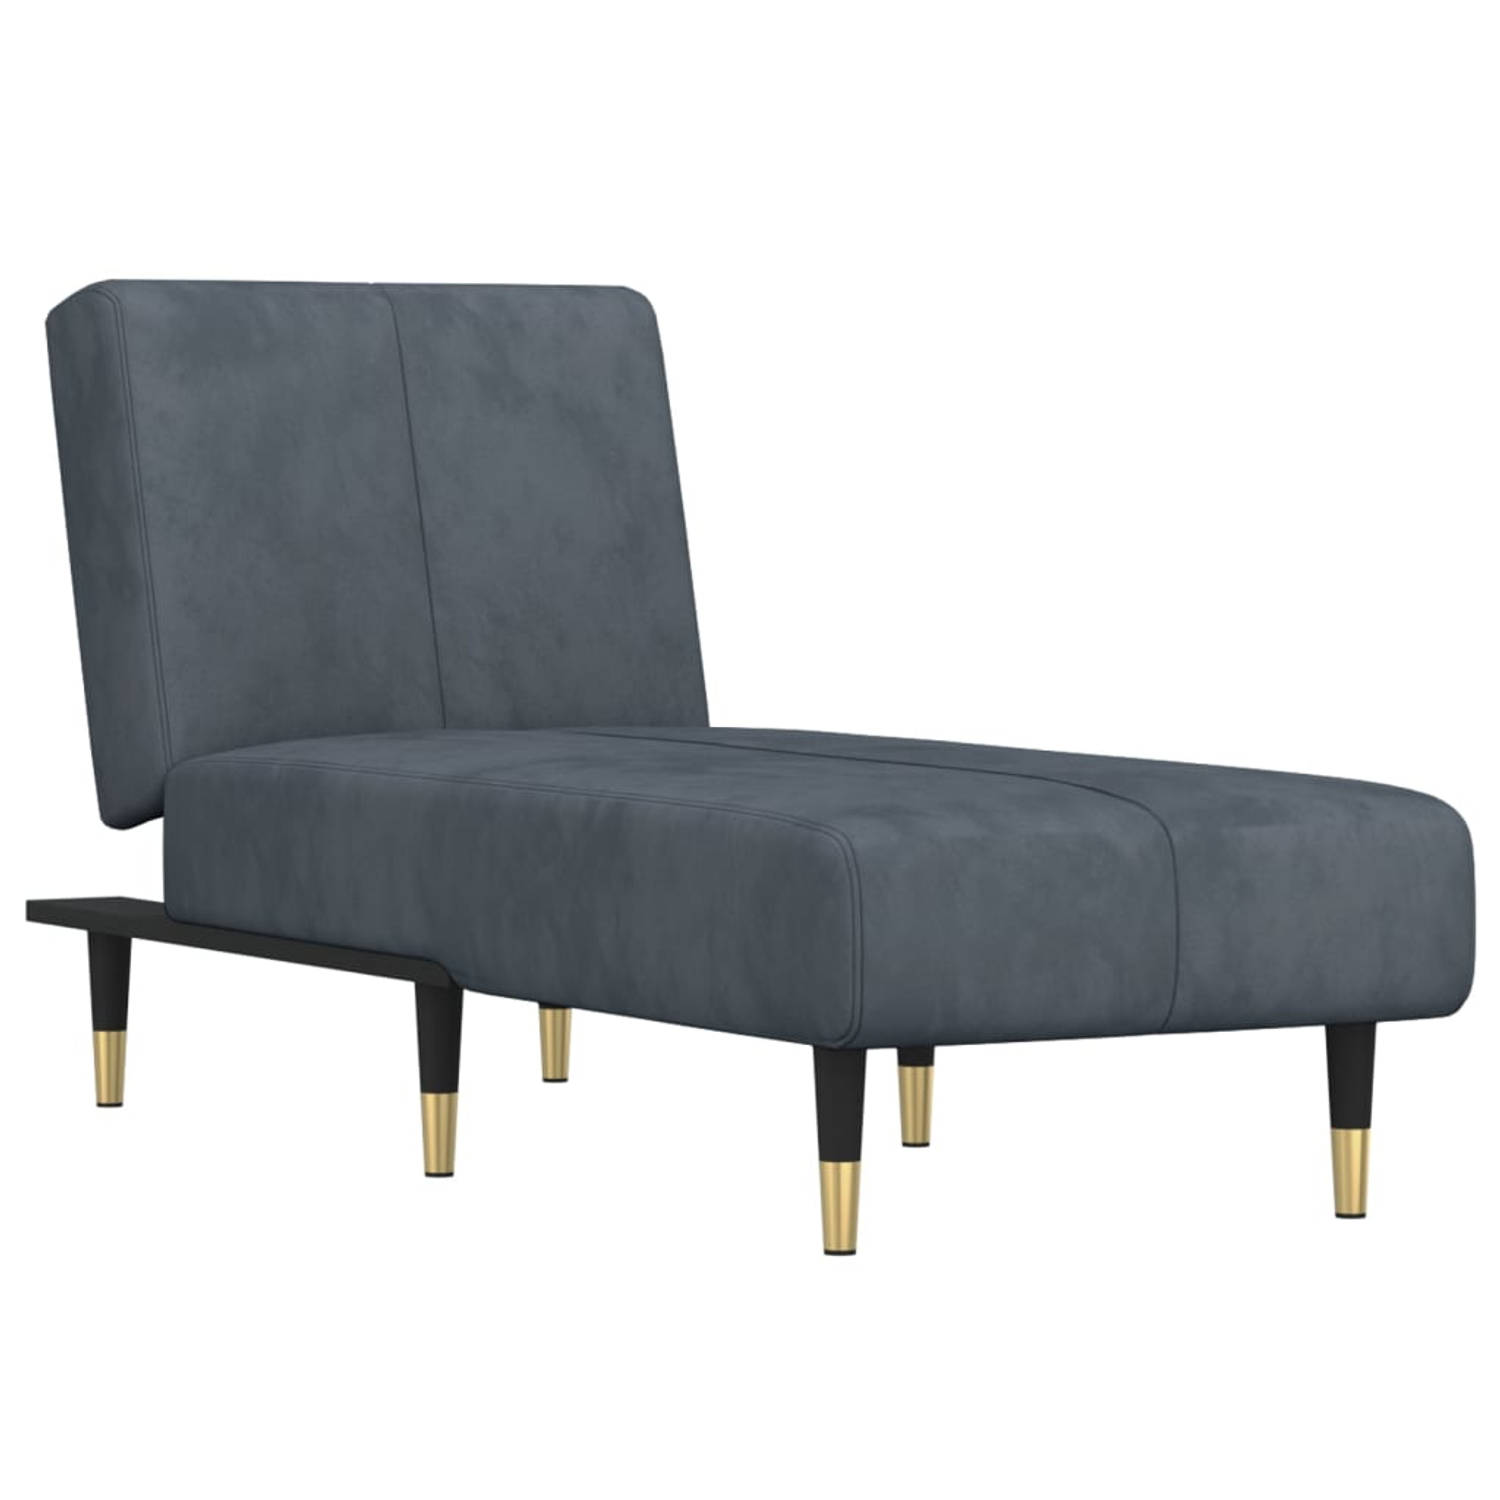 The Living Store Chaise longue fluweel donkergrijs - Chaise longue